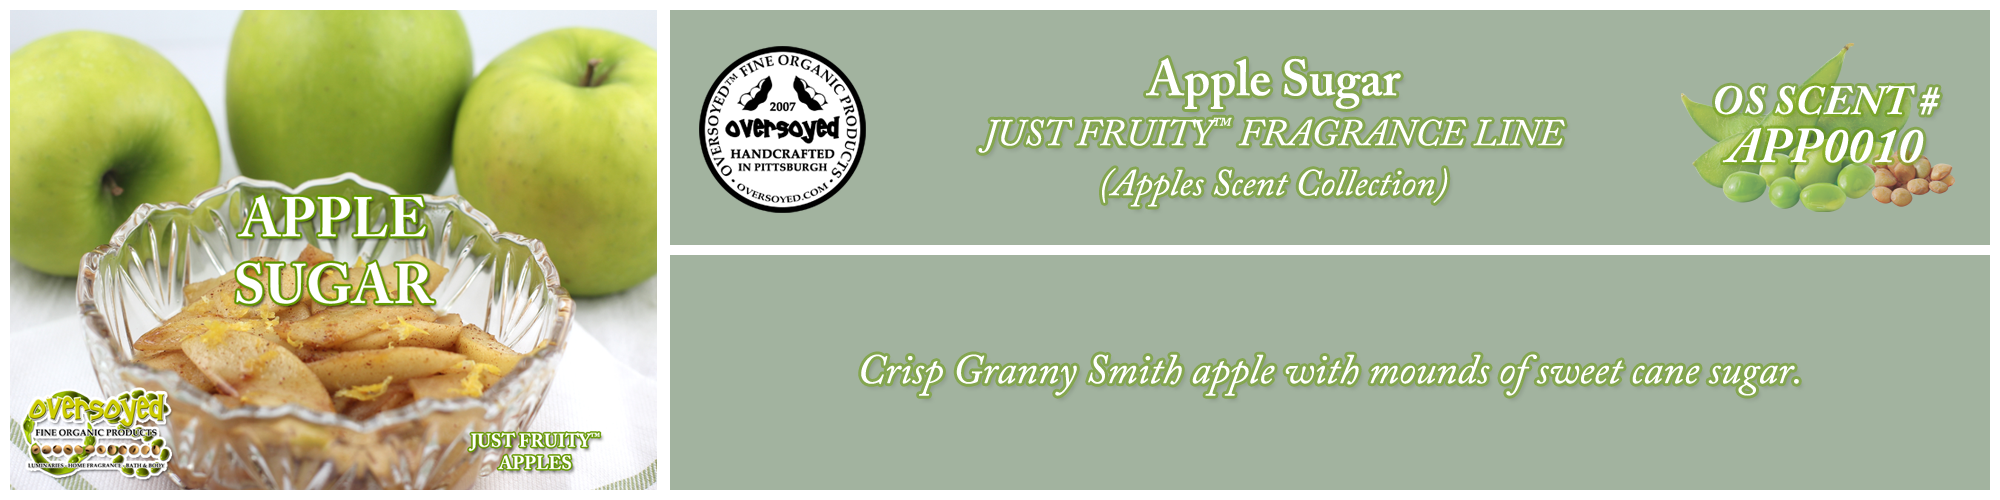 Apple Sugar Handcrafted Products Collection